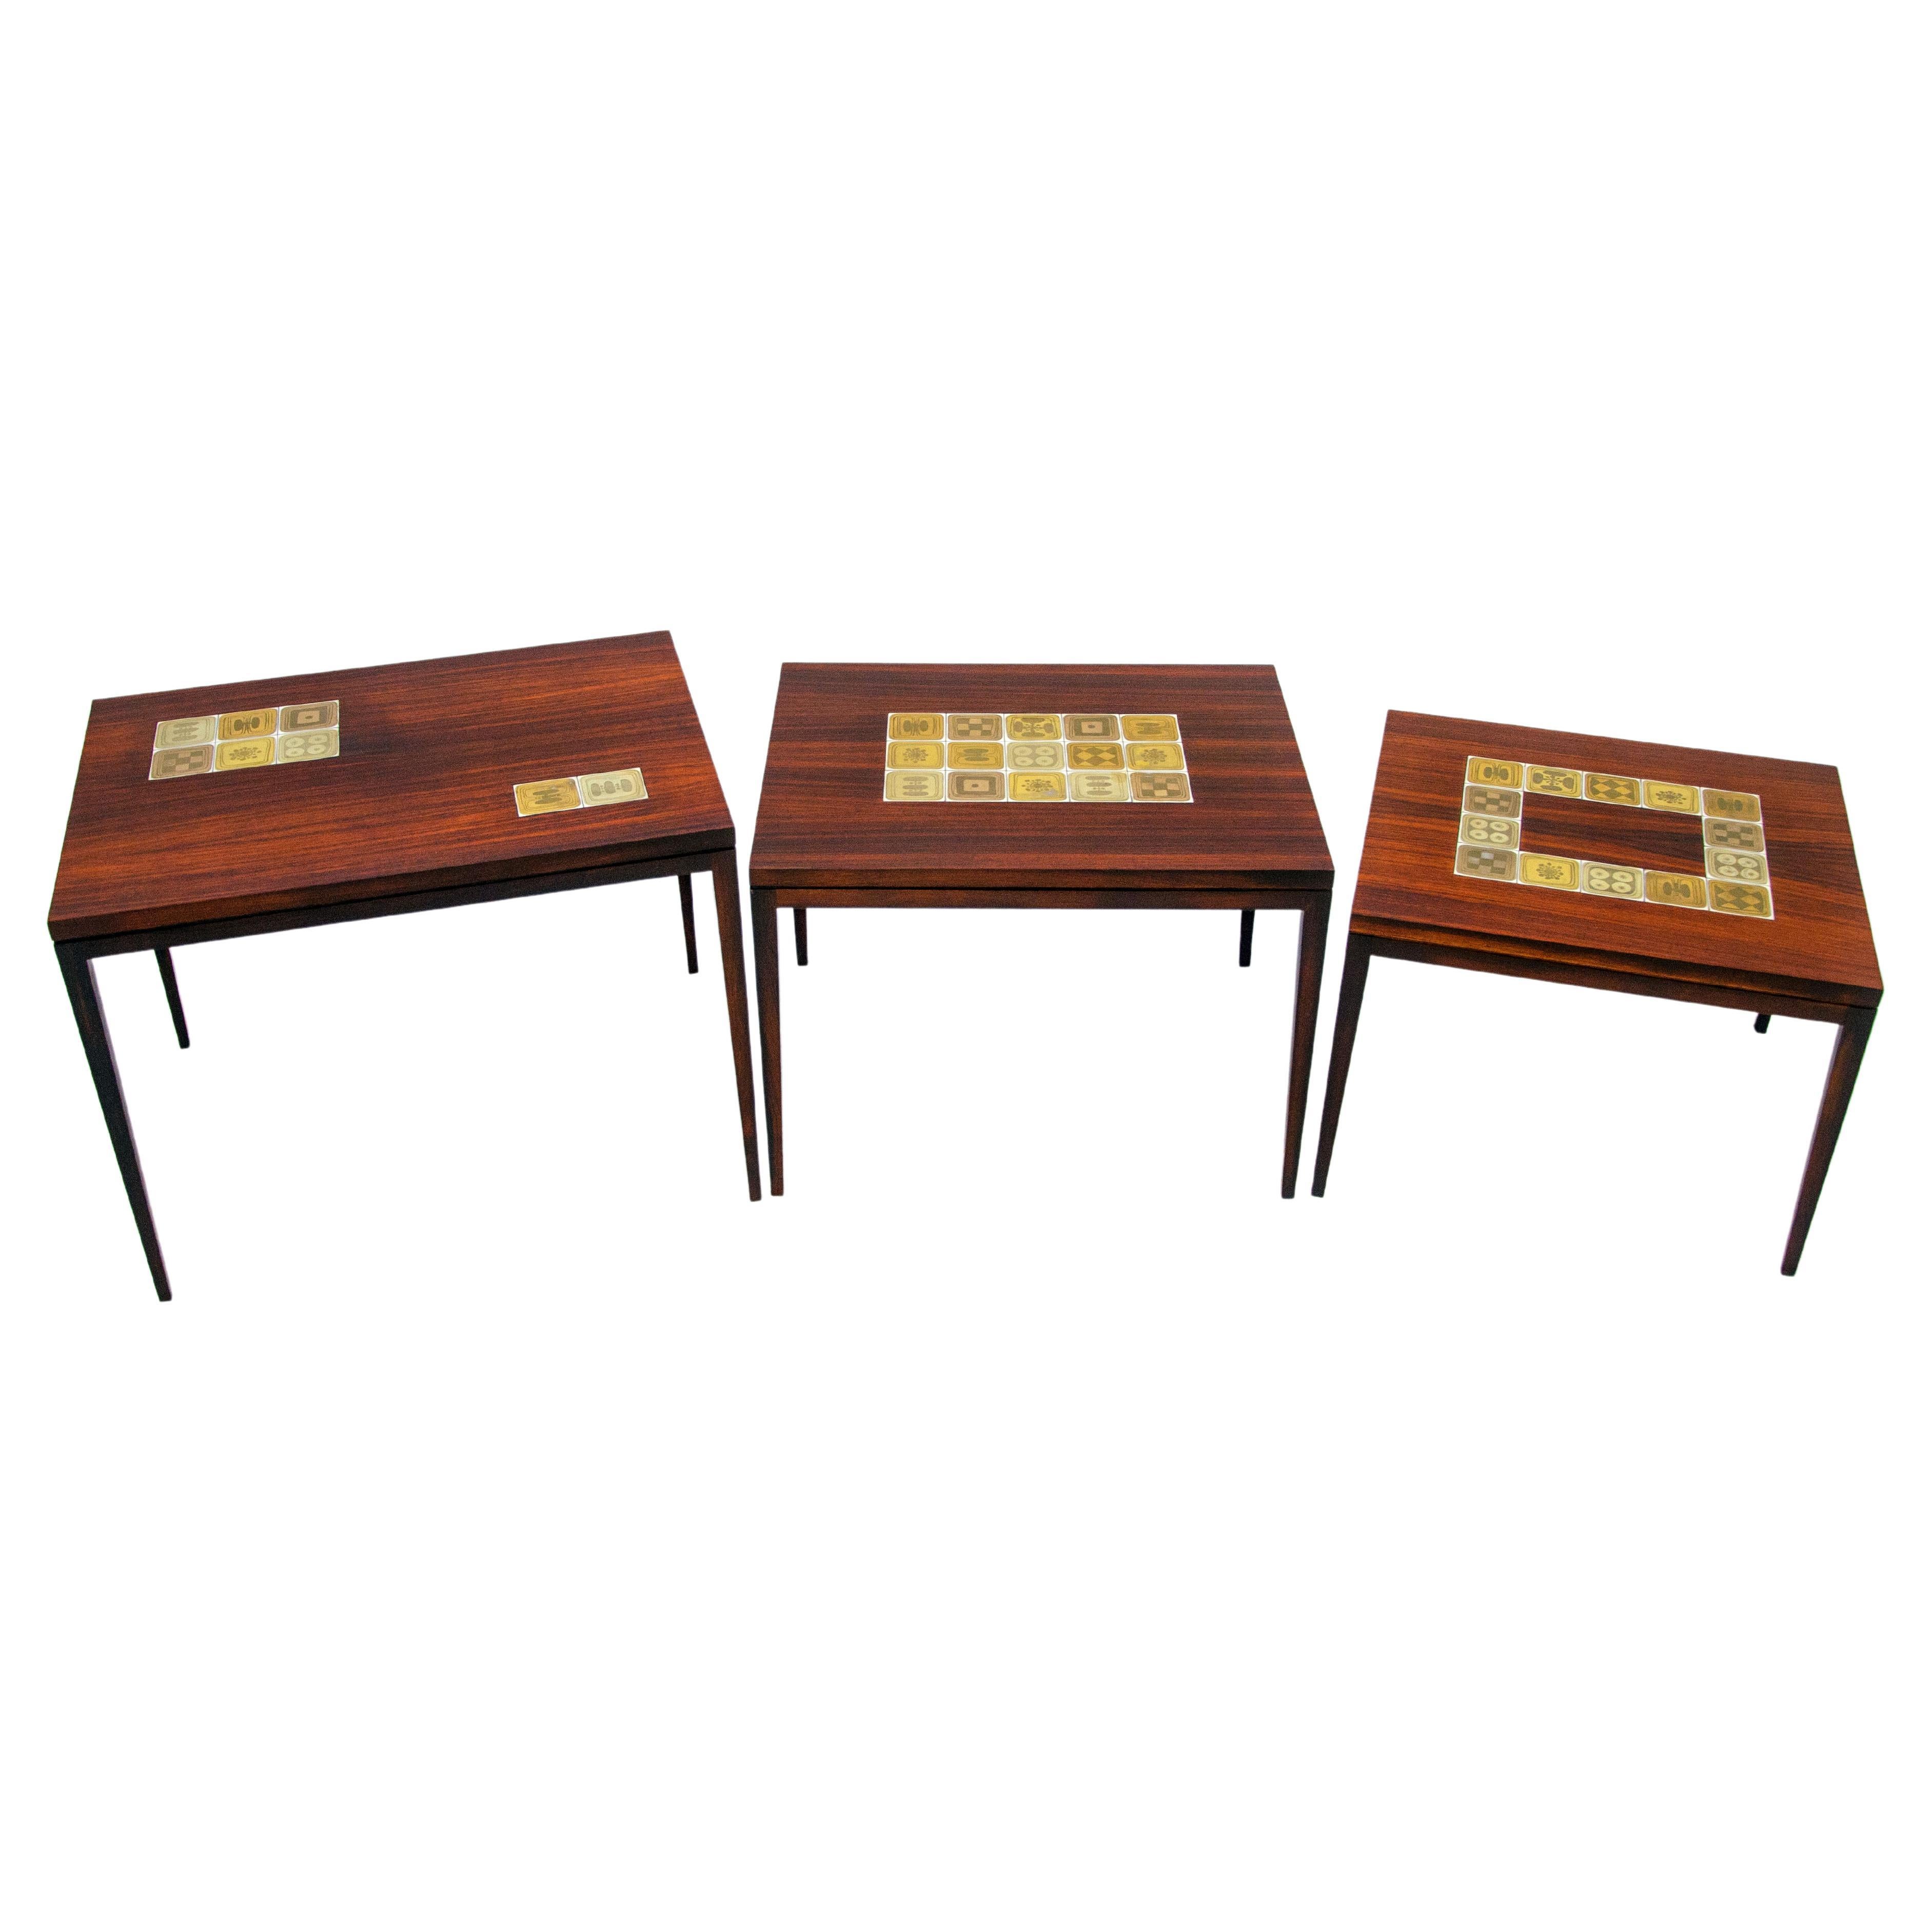 Set of Three Rosewood Nesting Tables, Rosenthal-Germany For Sale